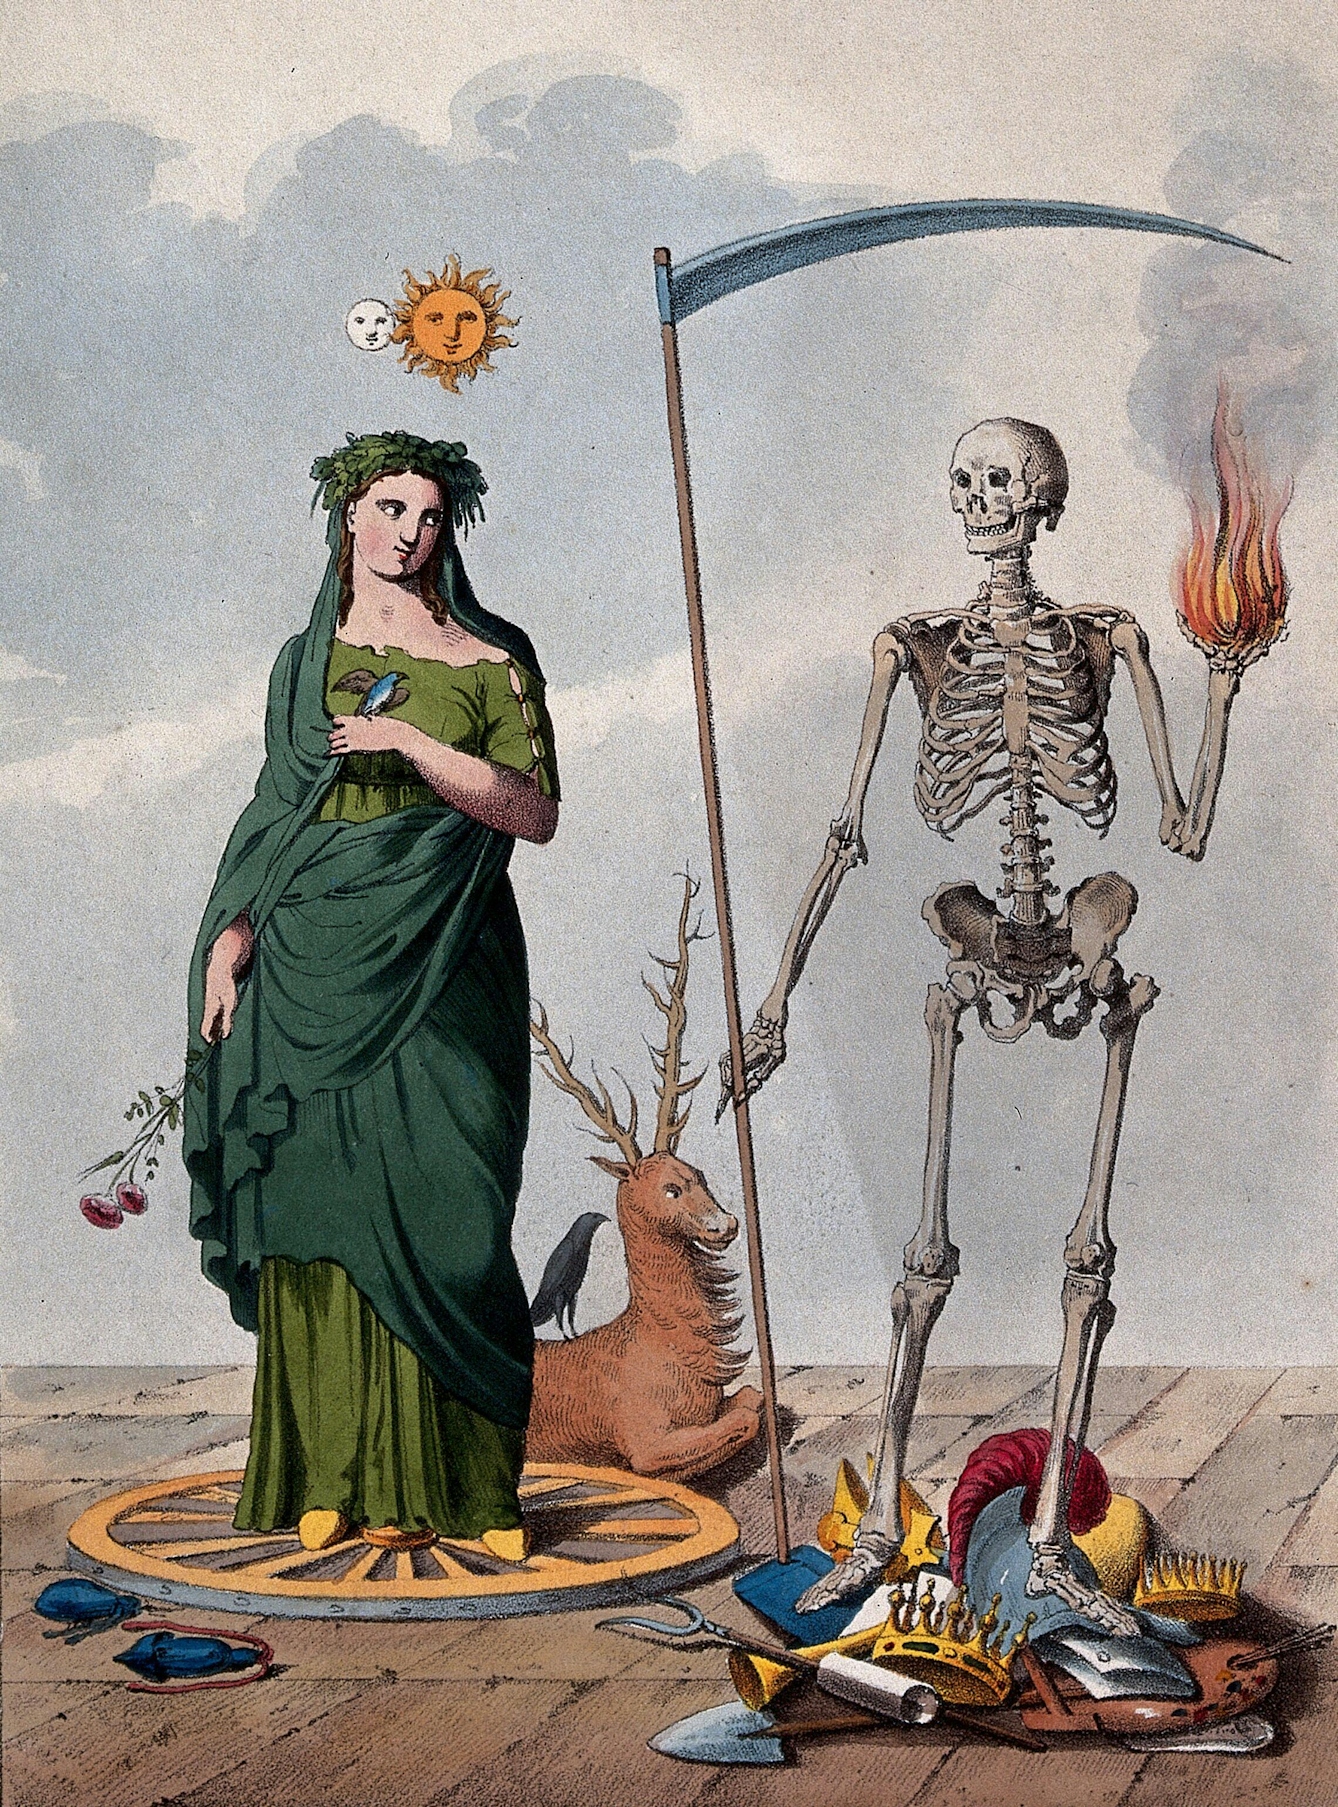 Colour illustration featuring two allegorical figures: a skeleton holding a scythe and a ball of fire stands next to a female figure in a green dress. She is holding a red flower in one hand, a bird perches on the other. The sun and moon are together in the sky above the woman's head. There is a stag with large antlers sitting on the floor behind the woman. There is a crow on the stag's back. The woman is standing on what looks like a wheel that's on its side. There are several items at the skeleton's feet including a shovel, a helmet, a crown and a brush.